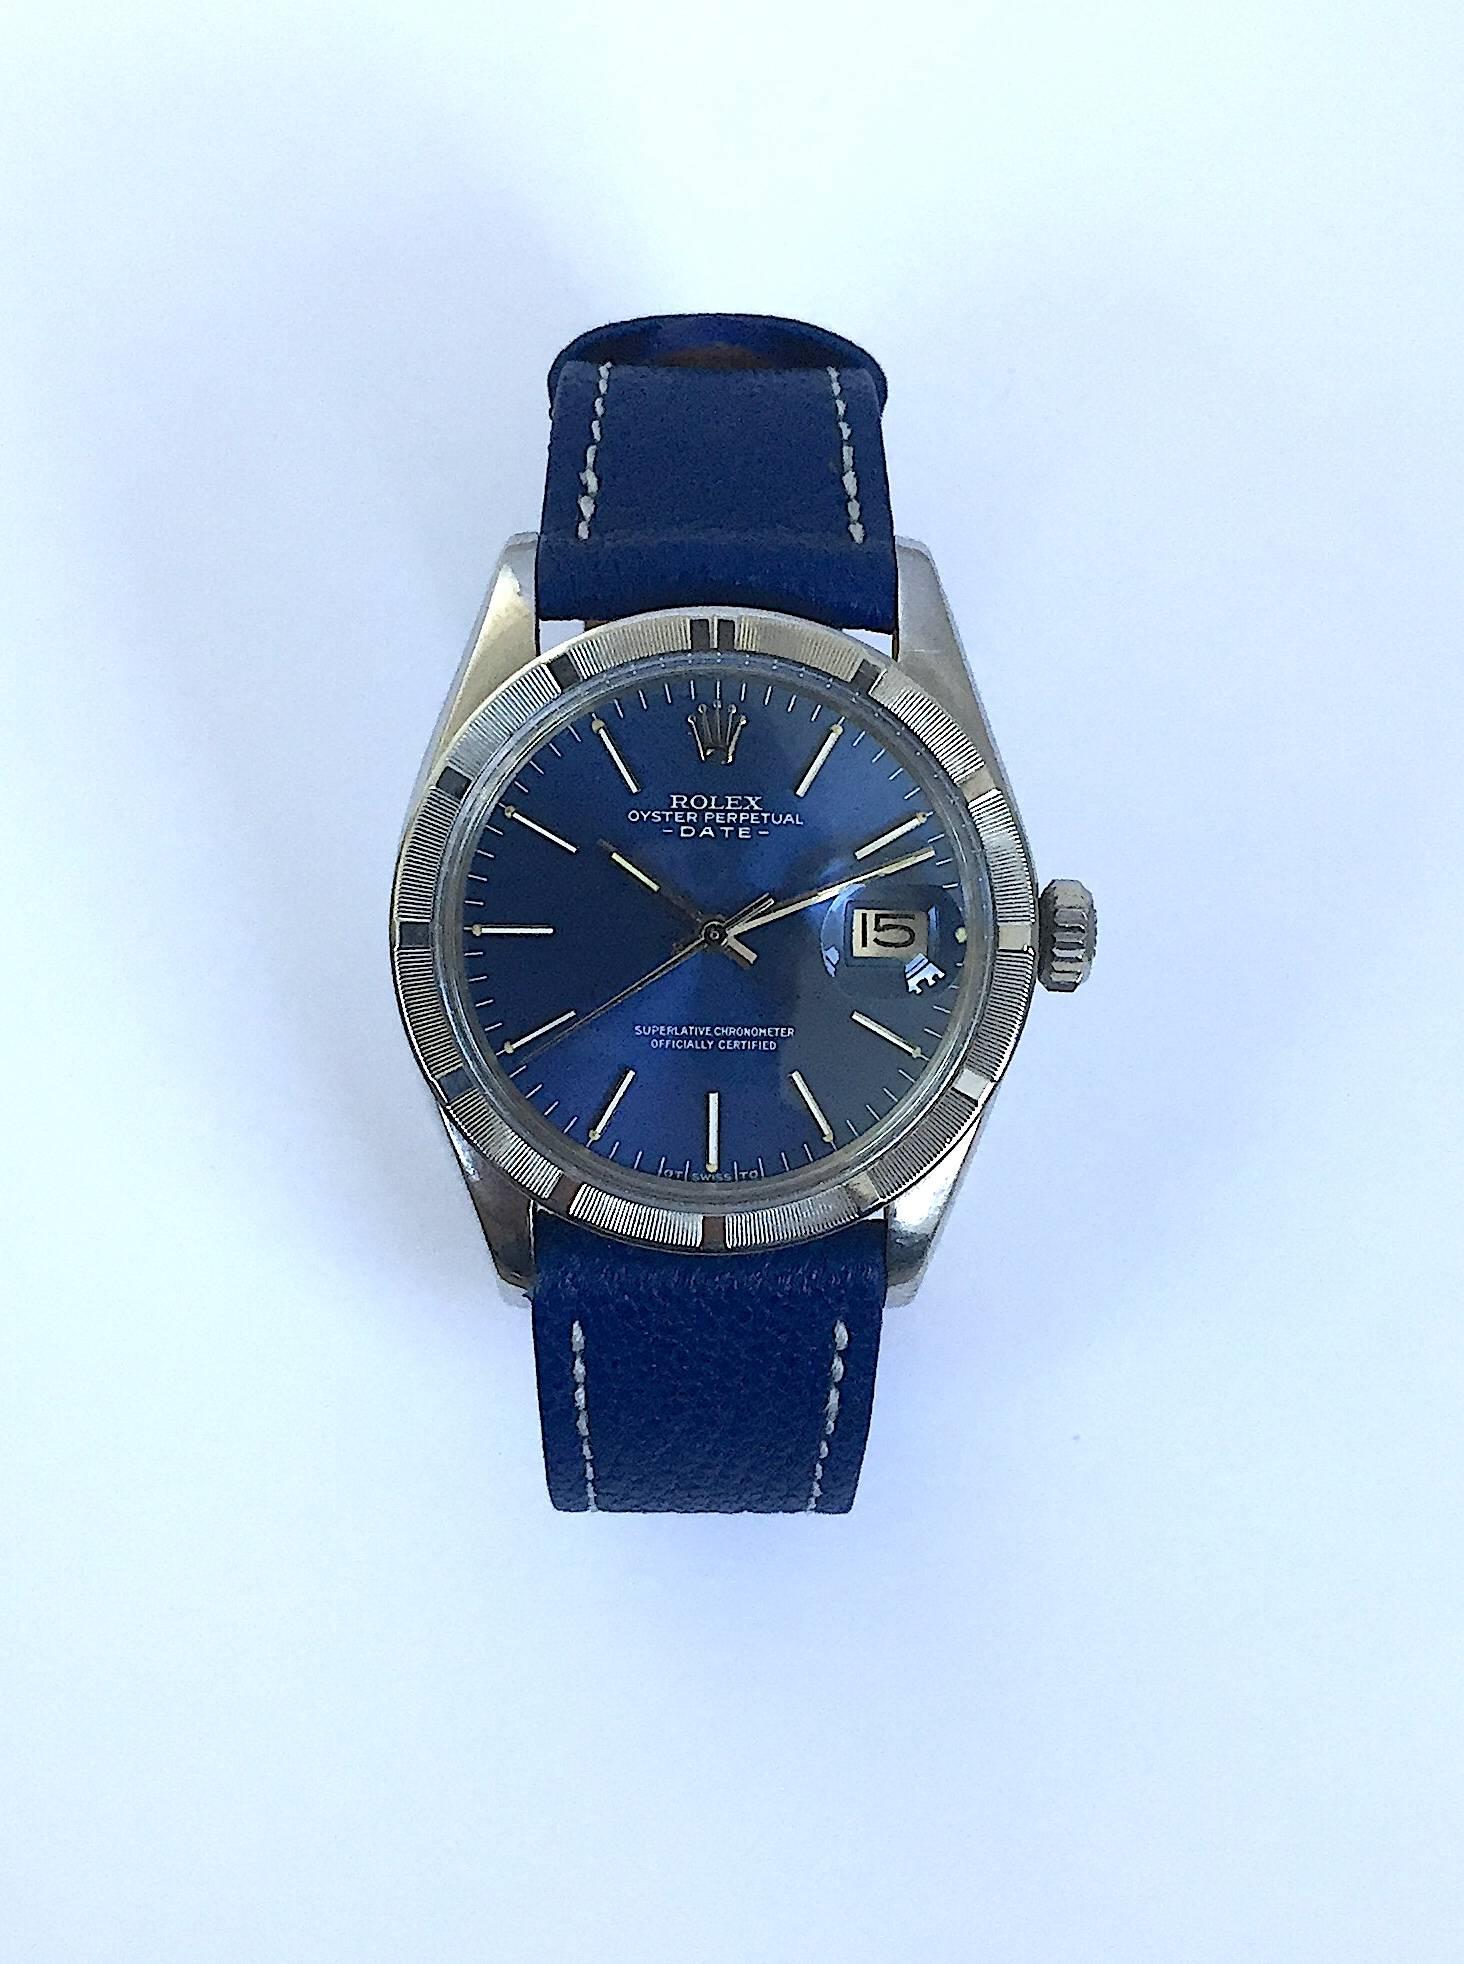 Rolex Stainless Steel Oyster Perpetual Date Watch
Factory  Blue Stick OT Swiss TO Sigma Dial with White Gold Applied Hour Markers
Stainless Steel Engine Turned Bezel
Stainless Steel Case
34mm in size 
Features Rolex Automatic Movement with Calibre